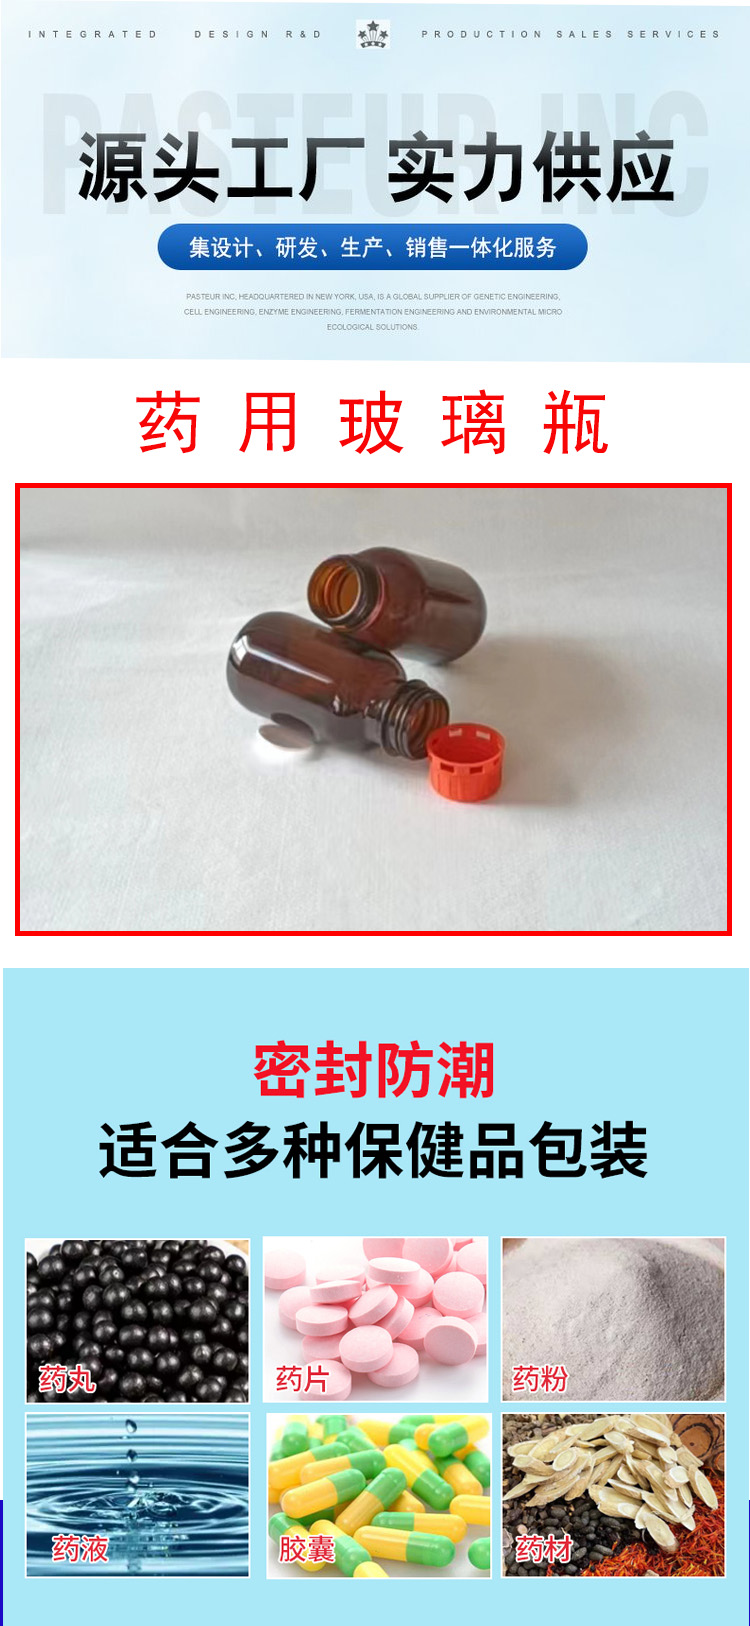 Human glass medicinal glass bottles, brown threaded nipple dropper bottles, customized and wholesale by manufacturers